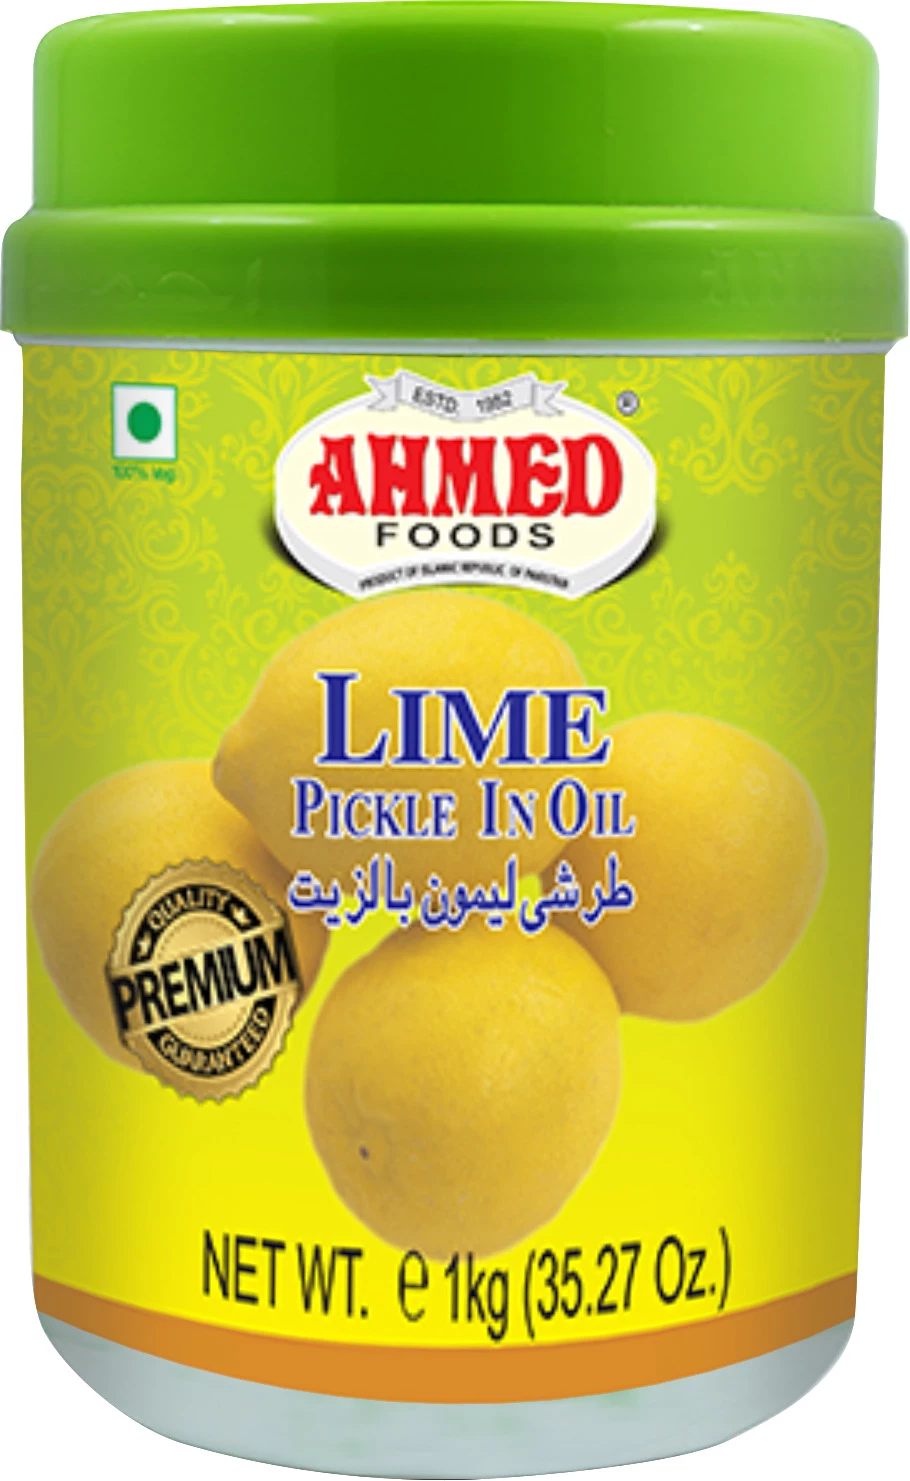 Lime Pickle In Oil 6 X 1 Kg - Ahmed